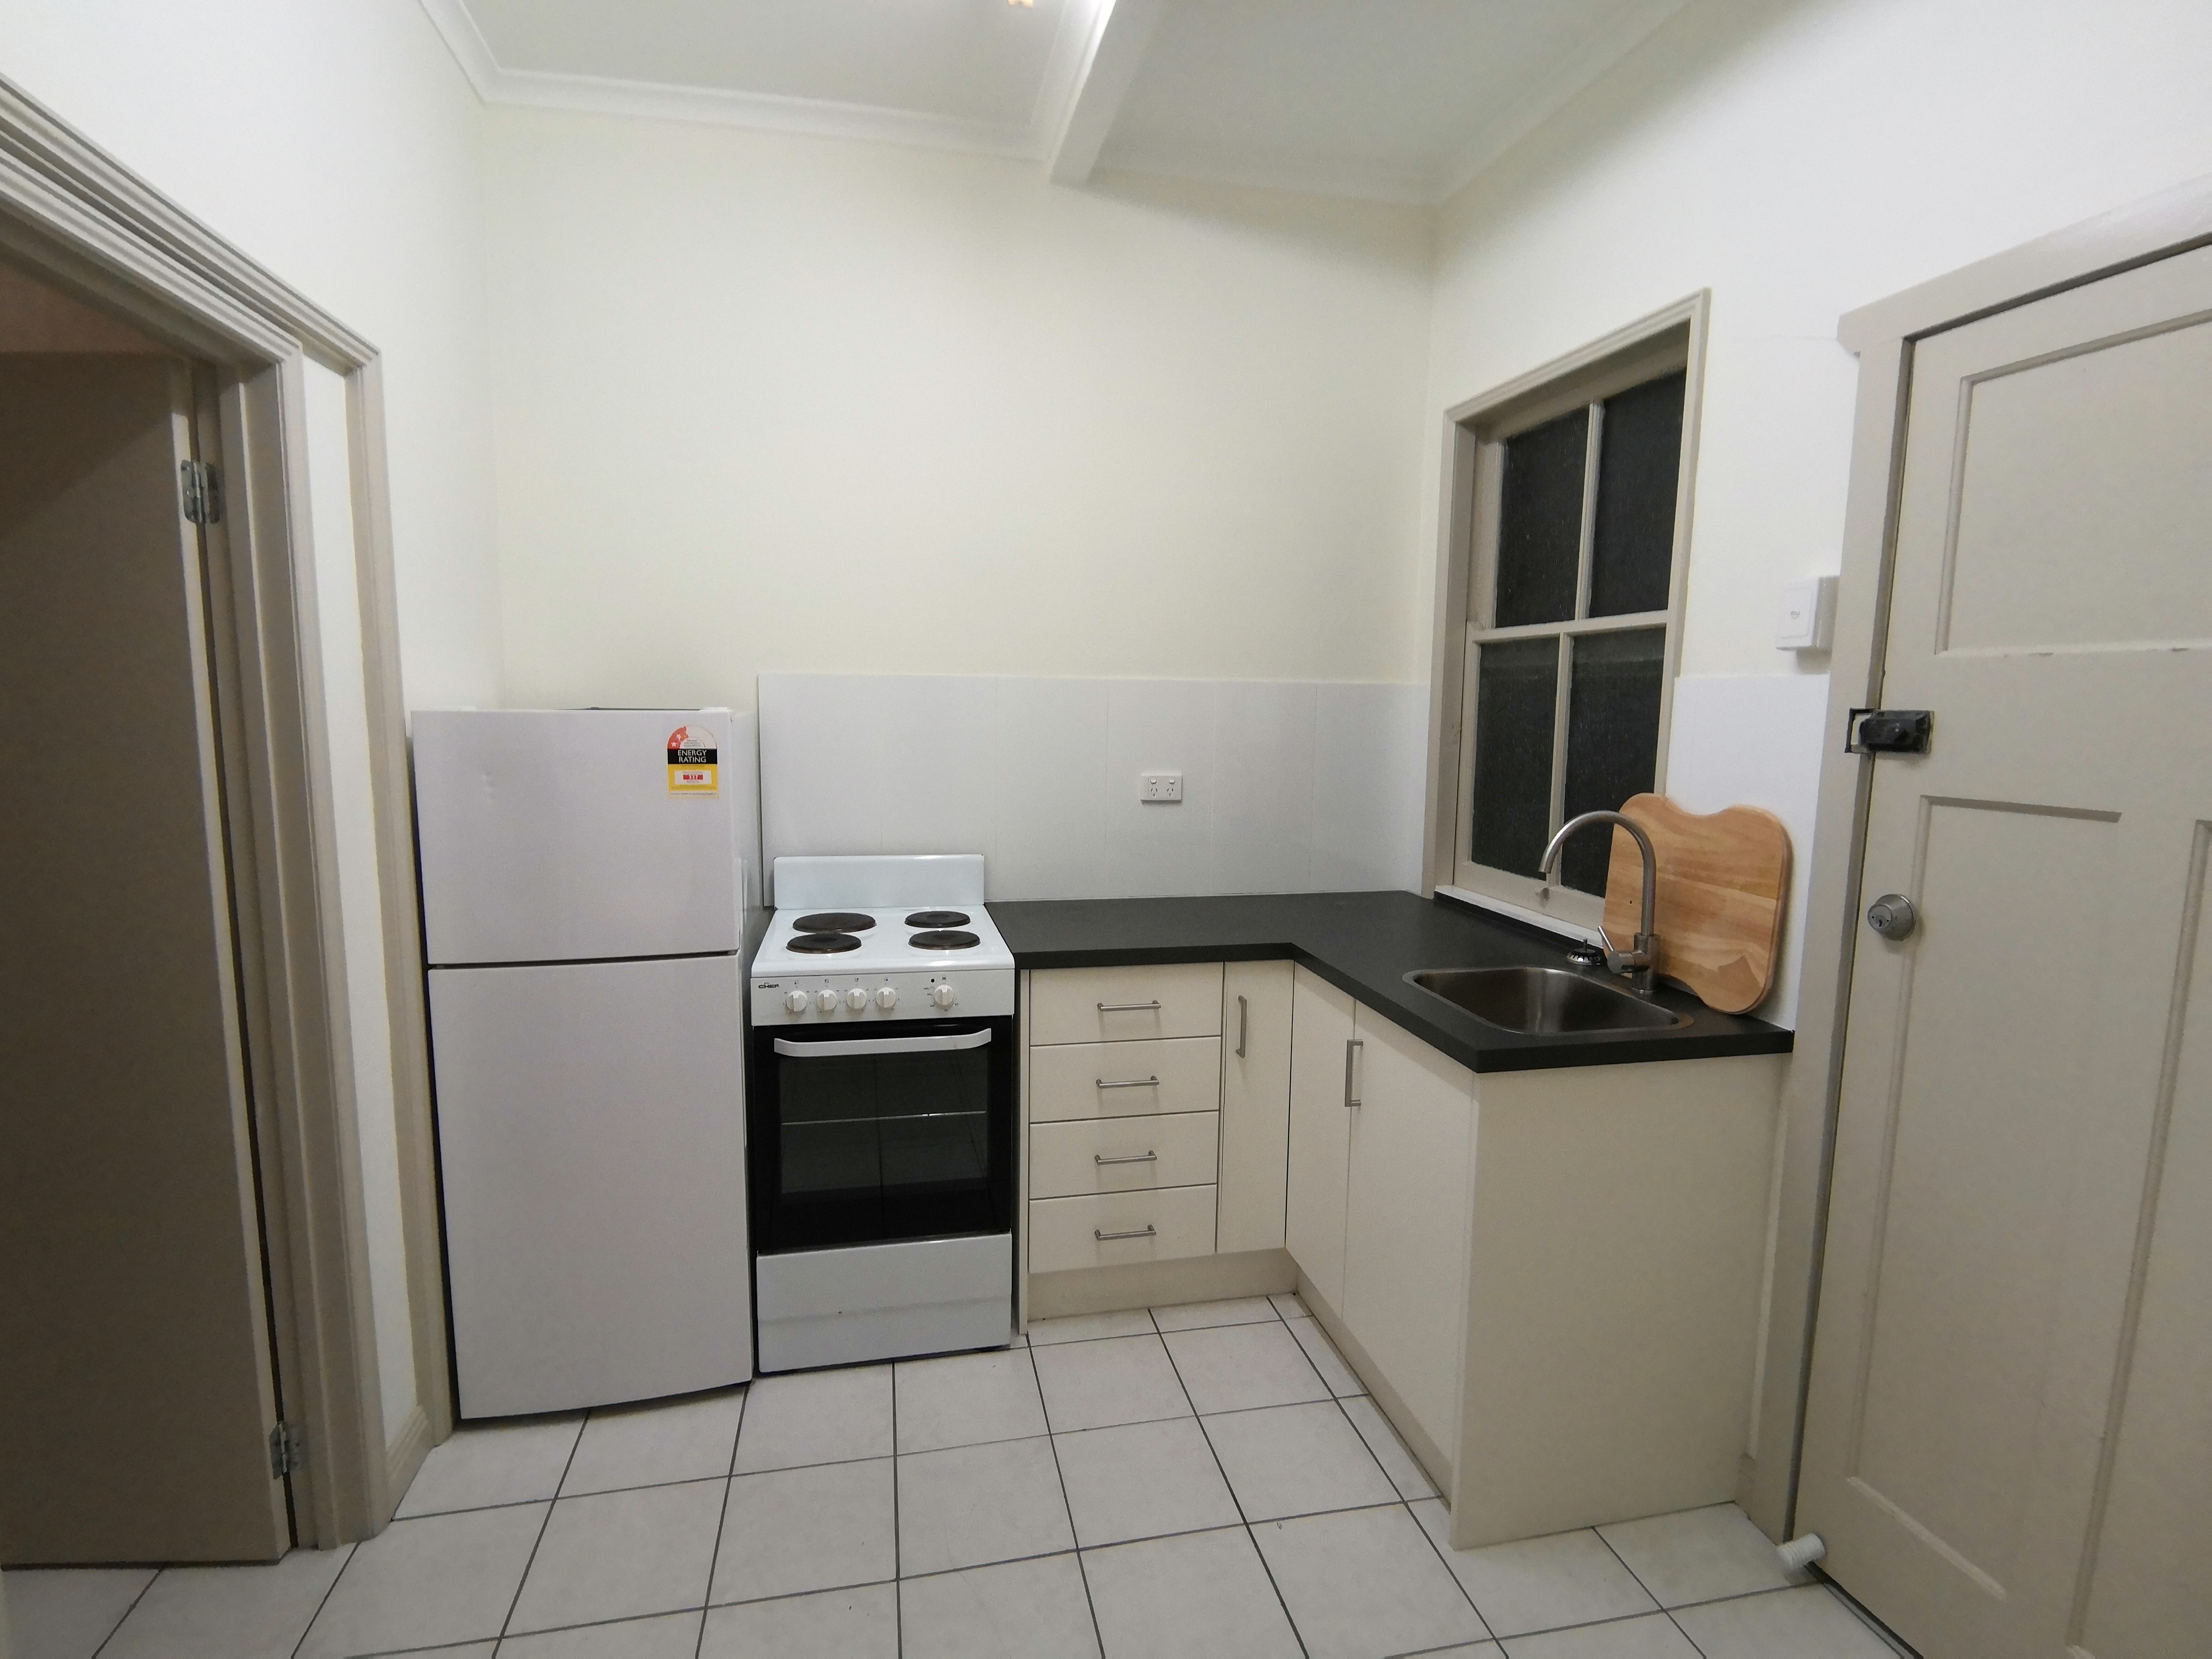 EXCELLENT CENTRAL WOOLOONGABBA LOCATION – FLAT